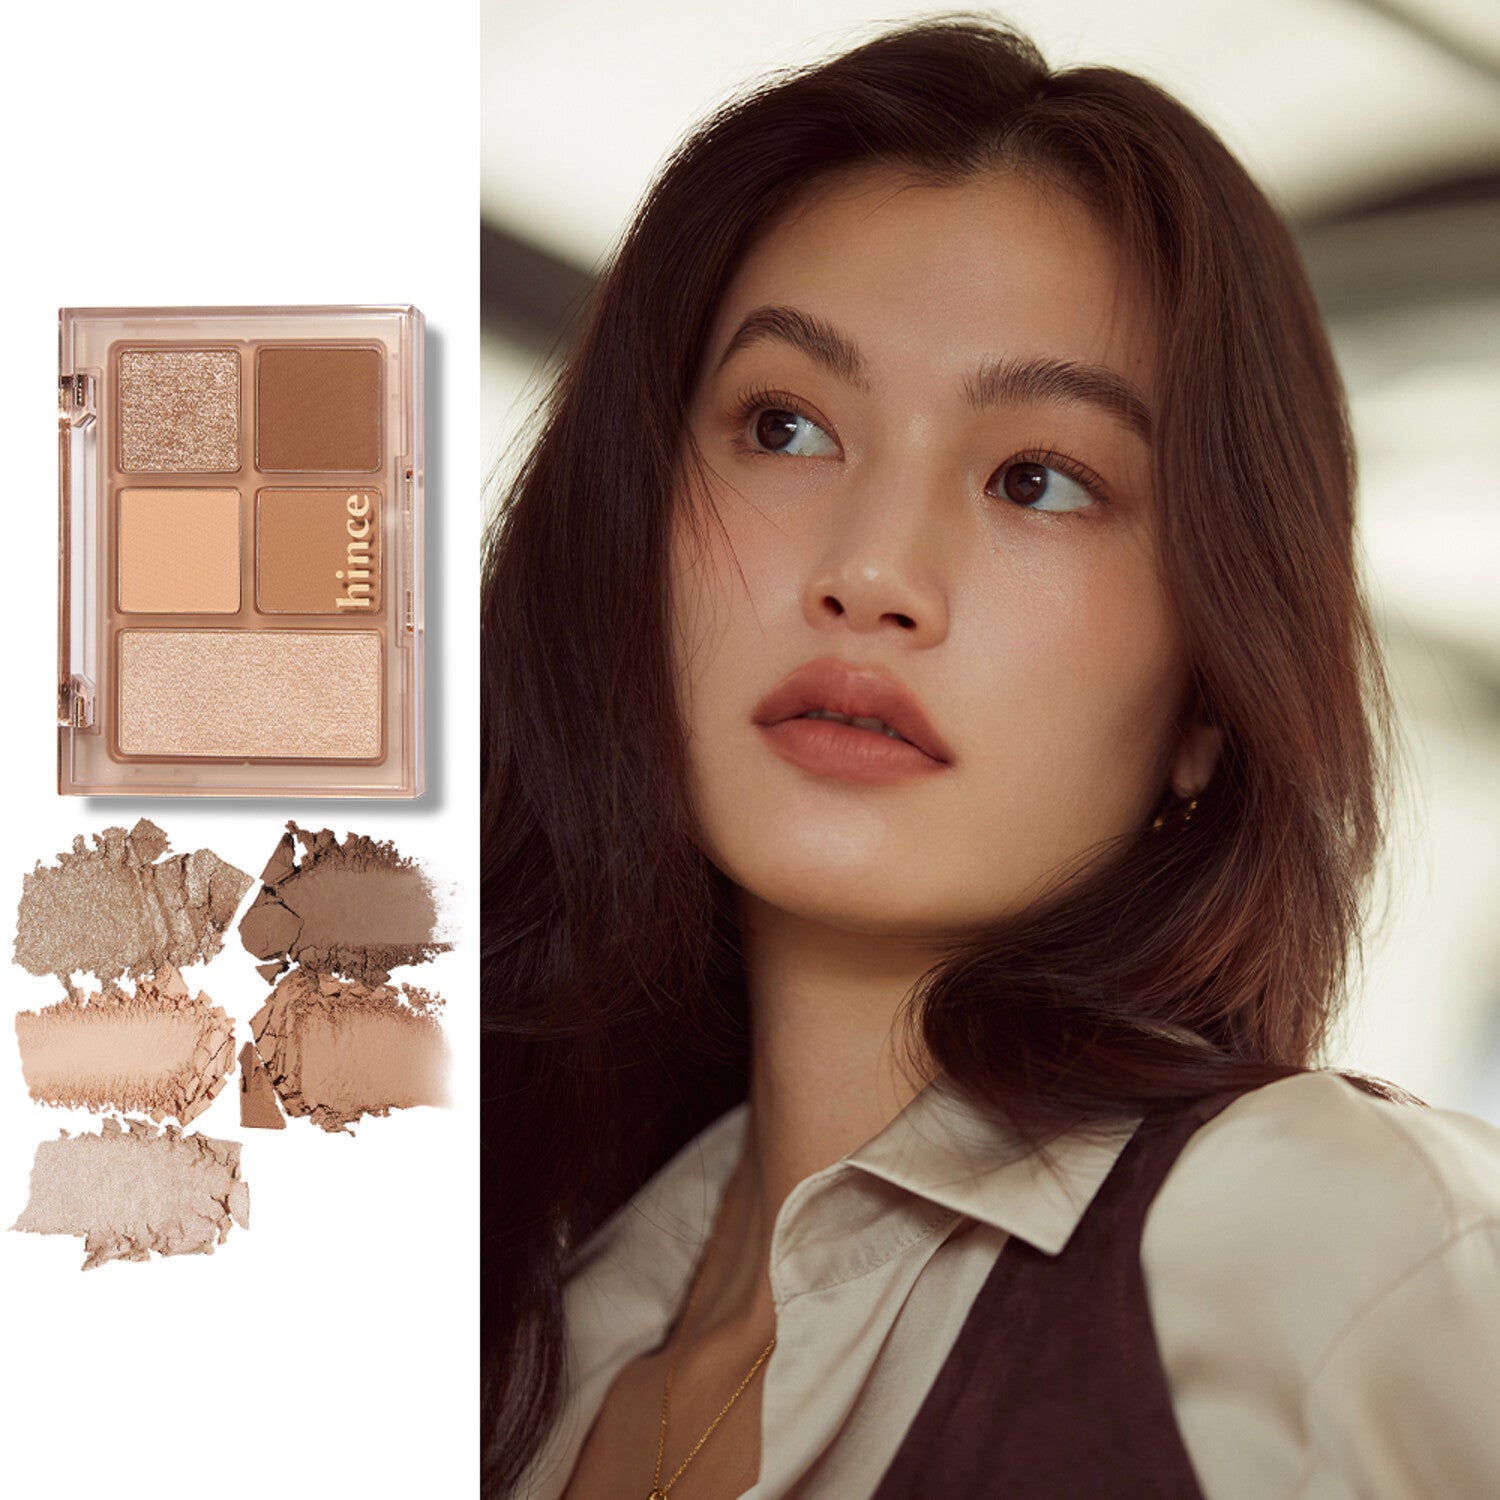 With a combination of matte and shimmer finishes, this palette allows for endless eye makeup looks, from subtle and natural to bold and dramatic.